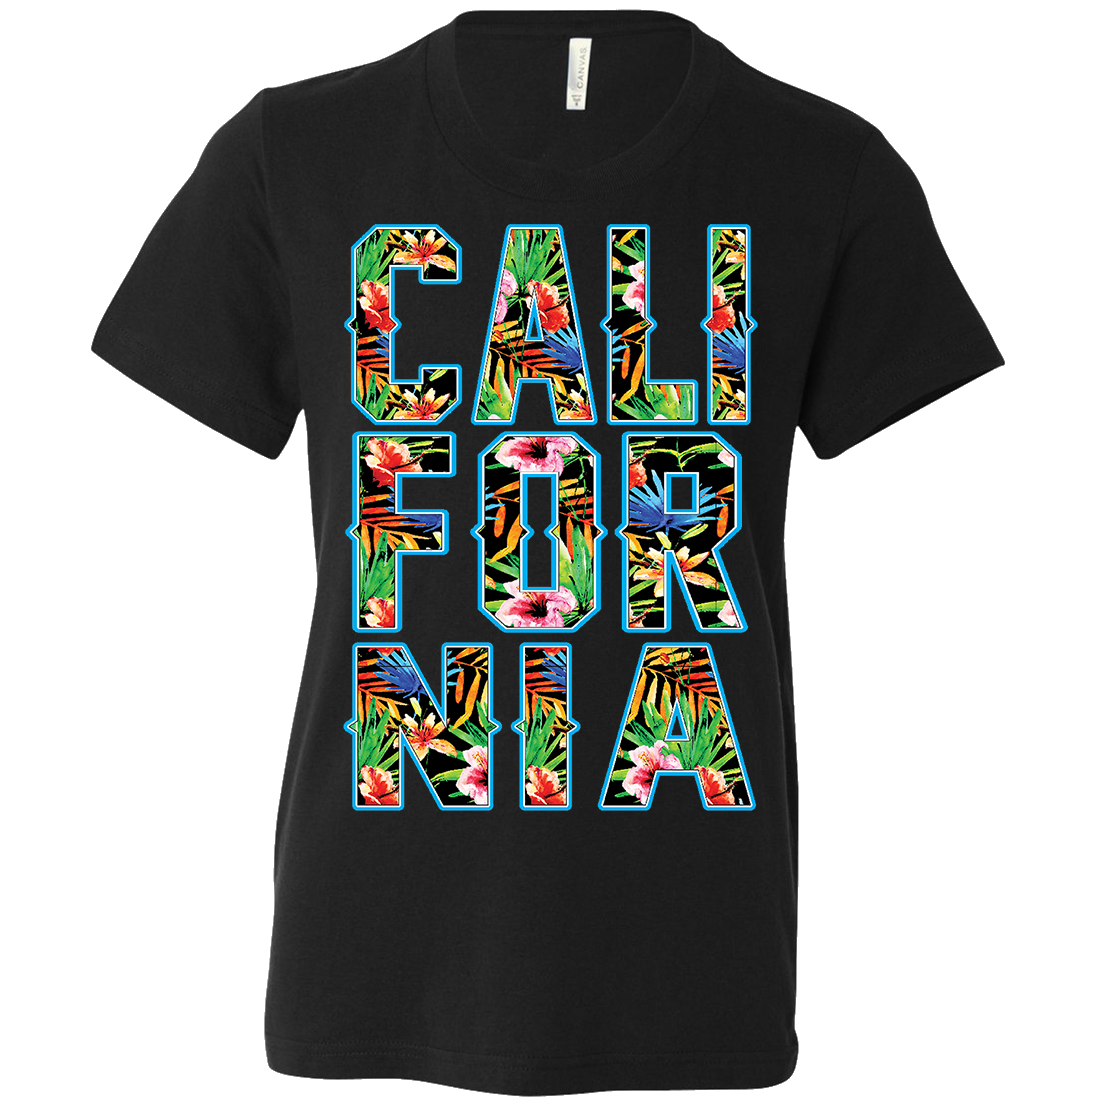 Tropical California Floral Print Asst Colors Youth T-Shirt/tee